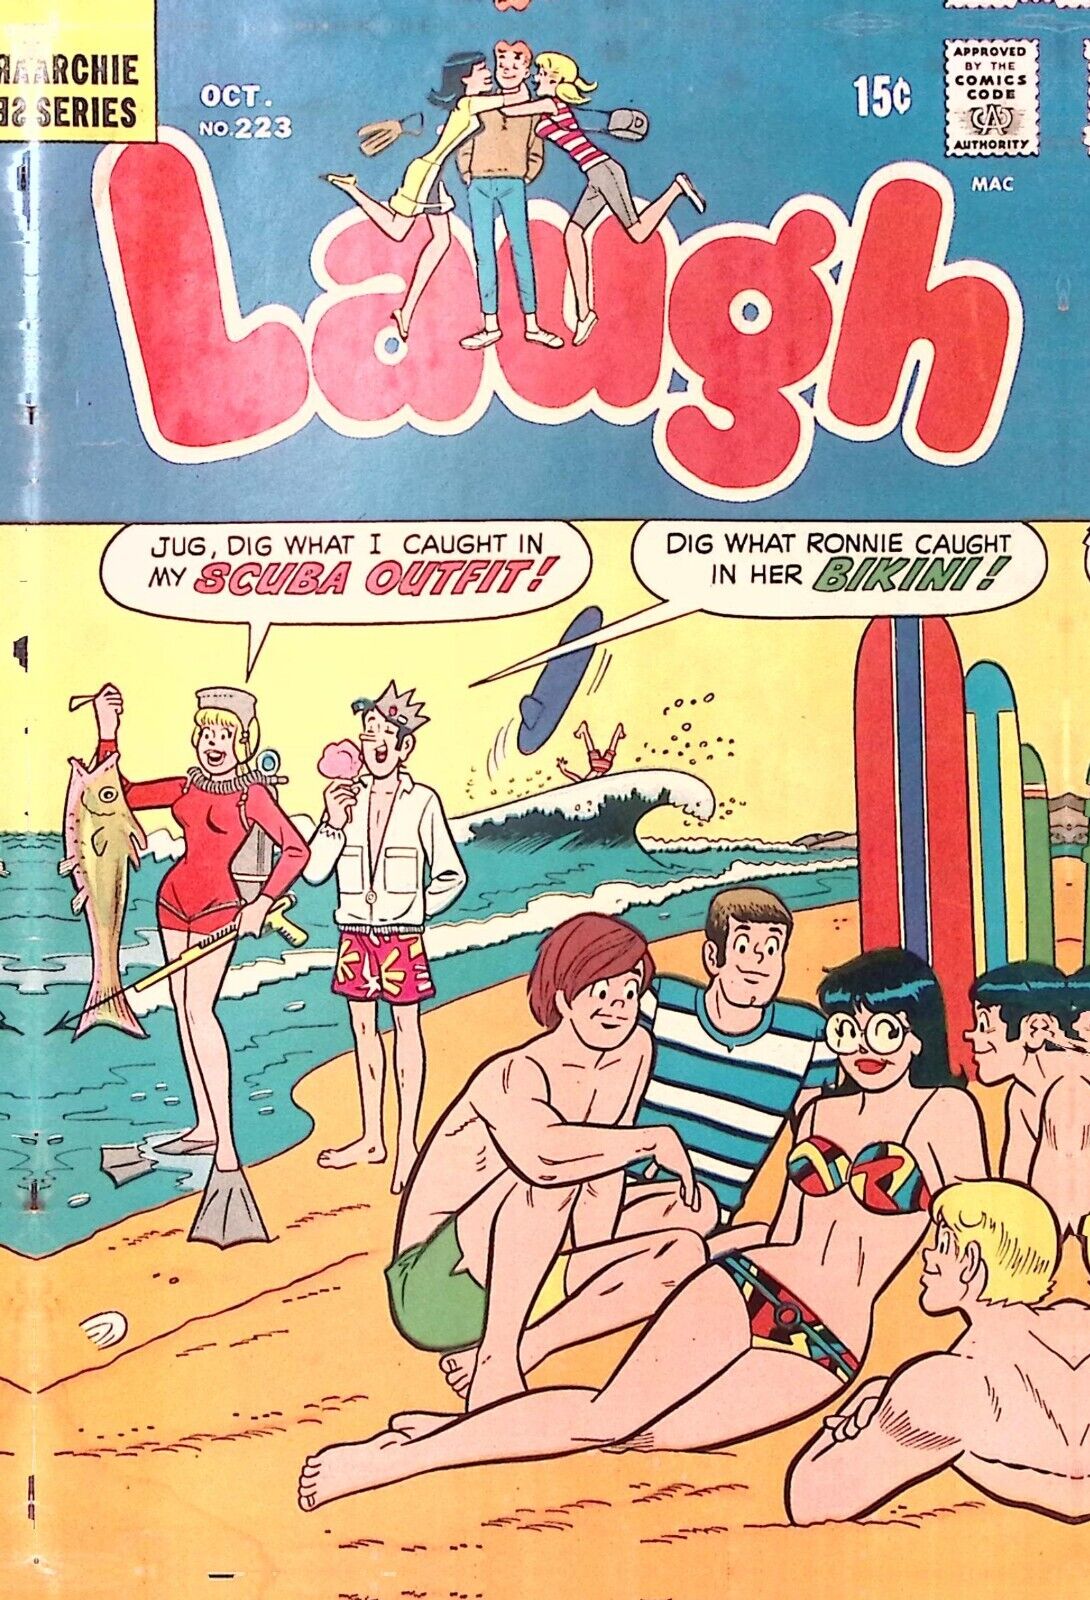 1969 ARCHIE SERIES LAUGH #223 OCT GOING TO THE DOGS PAWS THAT REFRESHES  Z2366